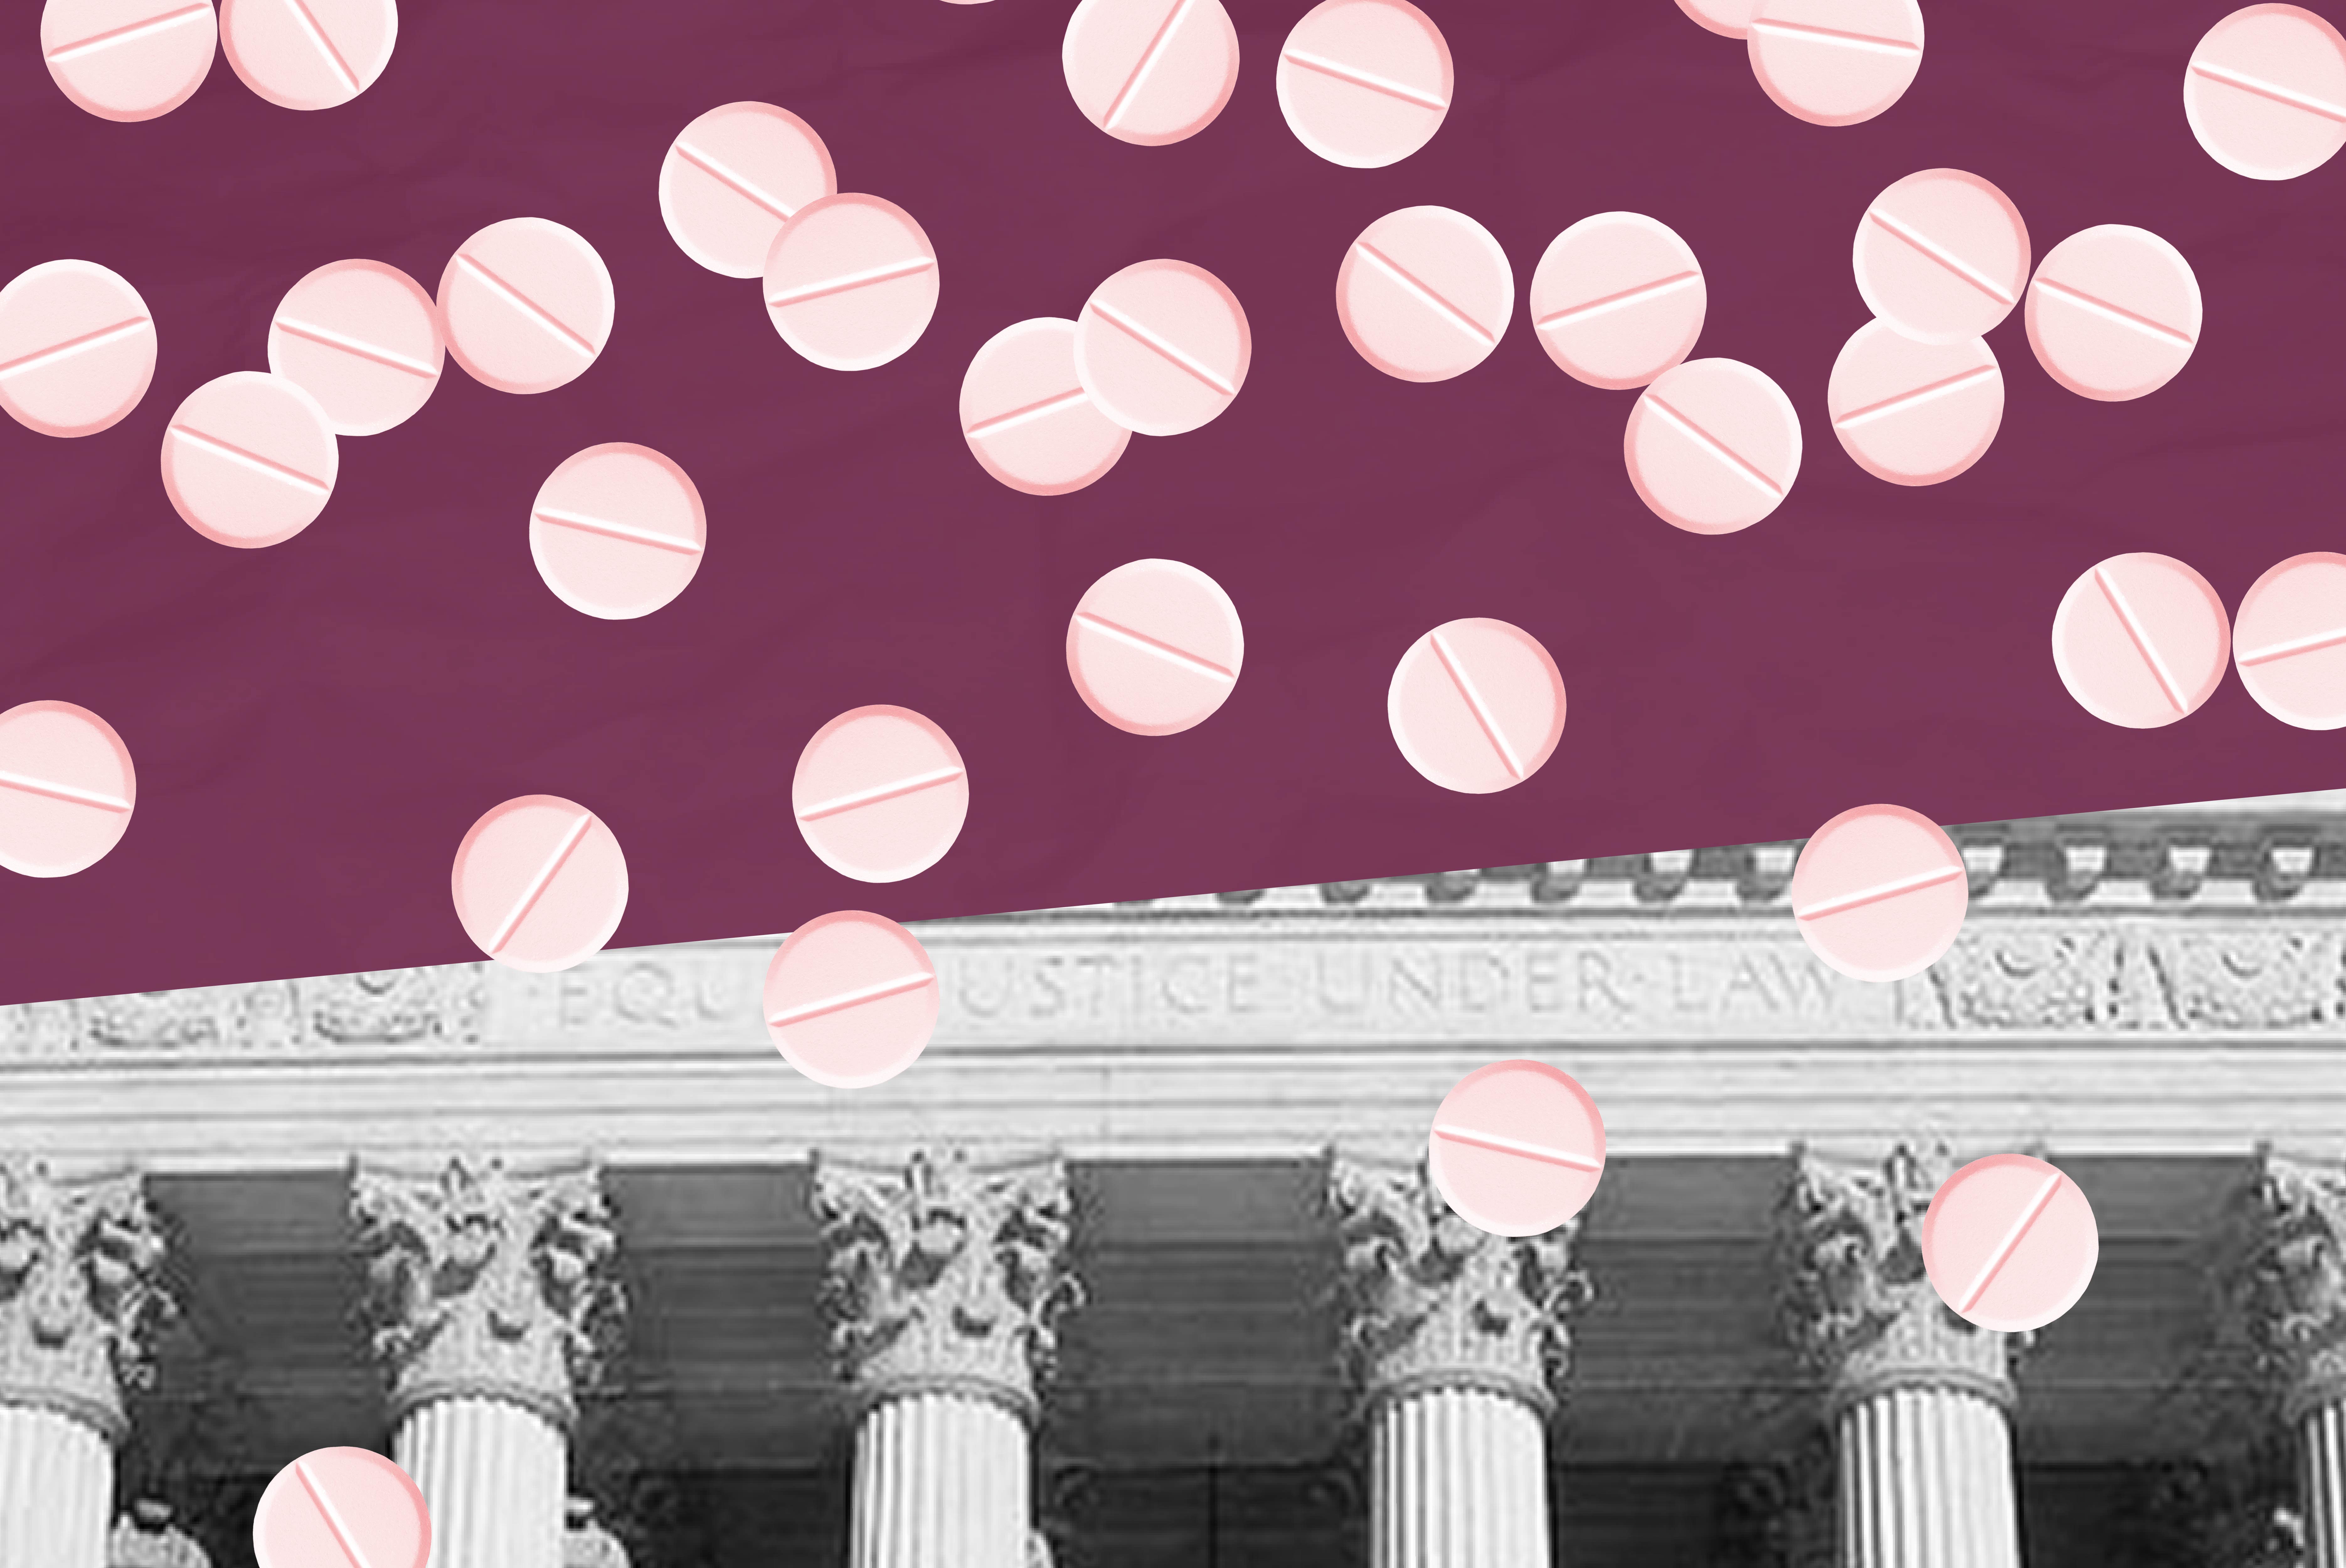 Supreme Court building with maroon top and abortion pills 